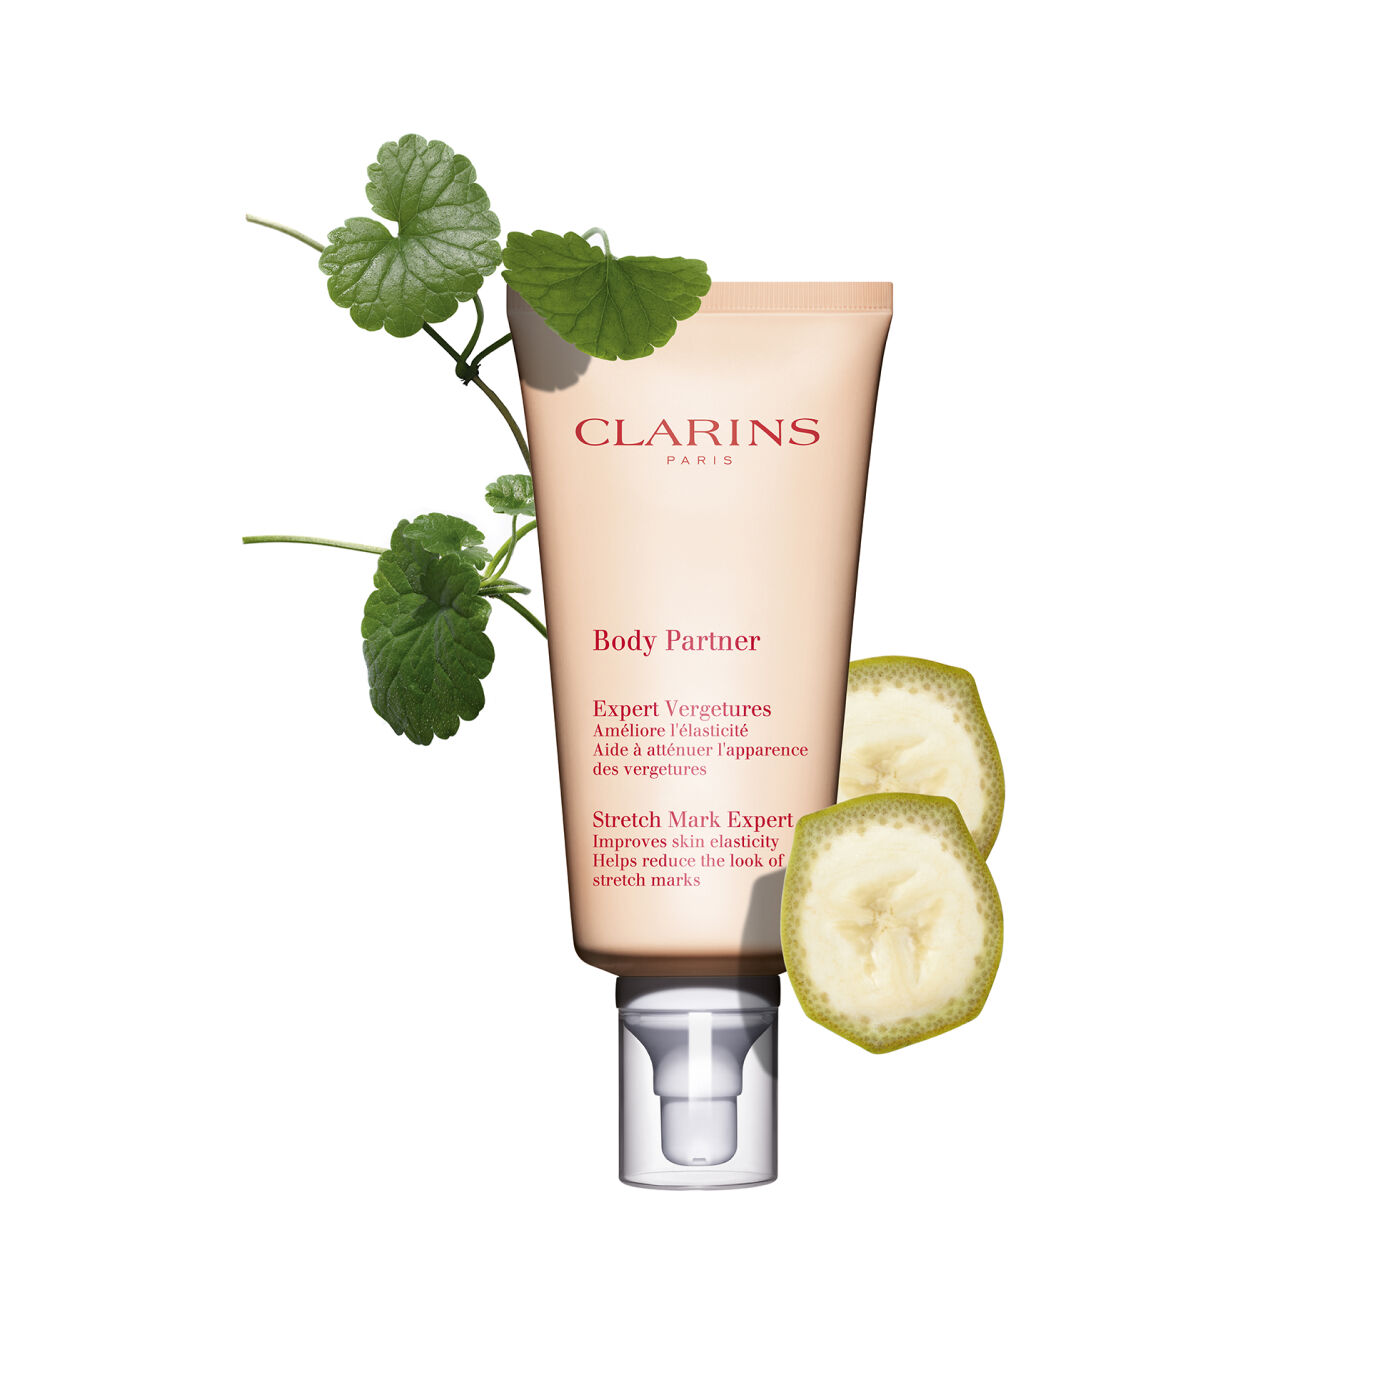 Clarins - [MOTHER'S DAY GIVEAWAY] Send mum a heartfelt e-card this Mother's  Day! 3 of the most touching messages will win an exclusive Mother's Day  Beauty Gift worth $109! Head over to